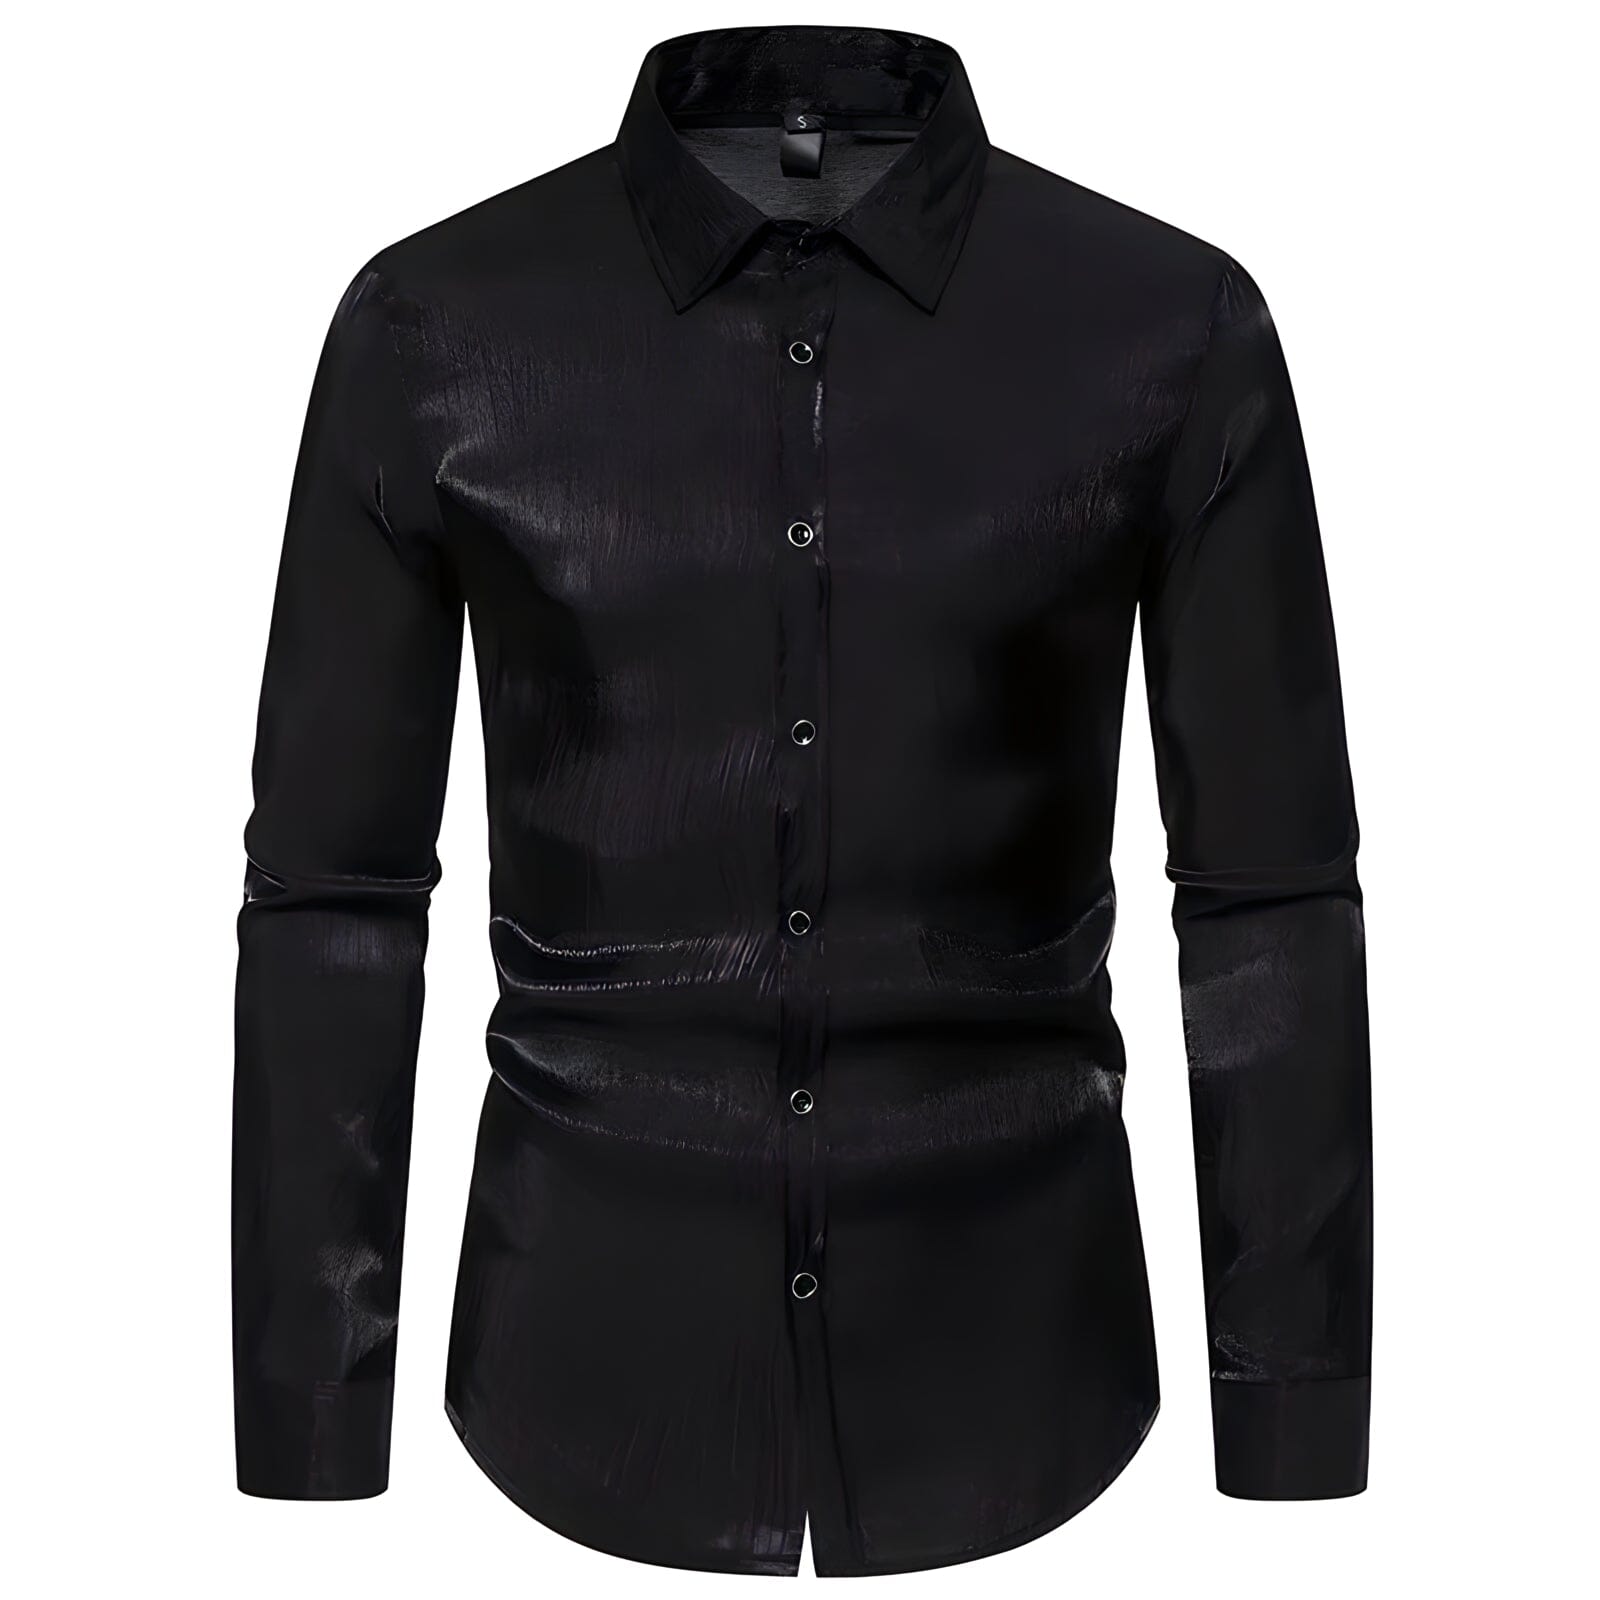 The Lucian Long Sleeve Silk Shirt - Multiple Colors WD Styles Black S 